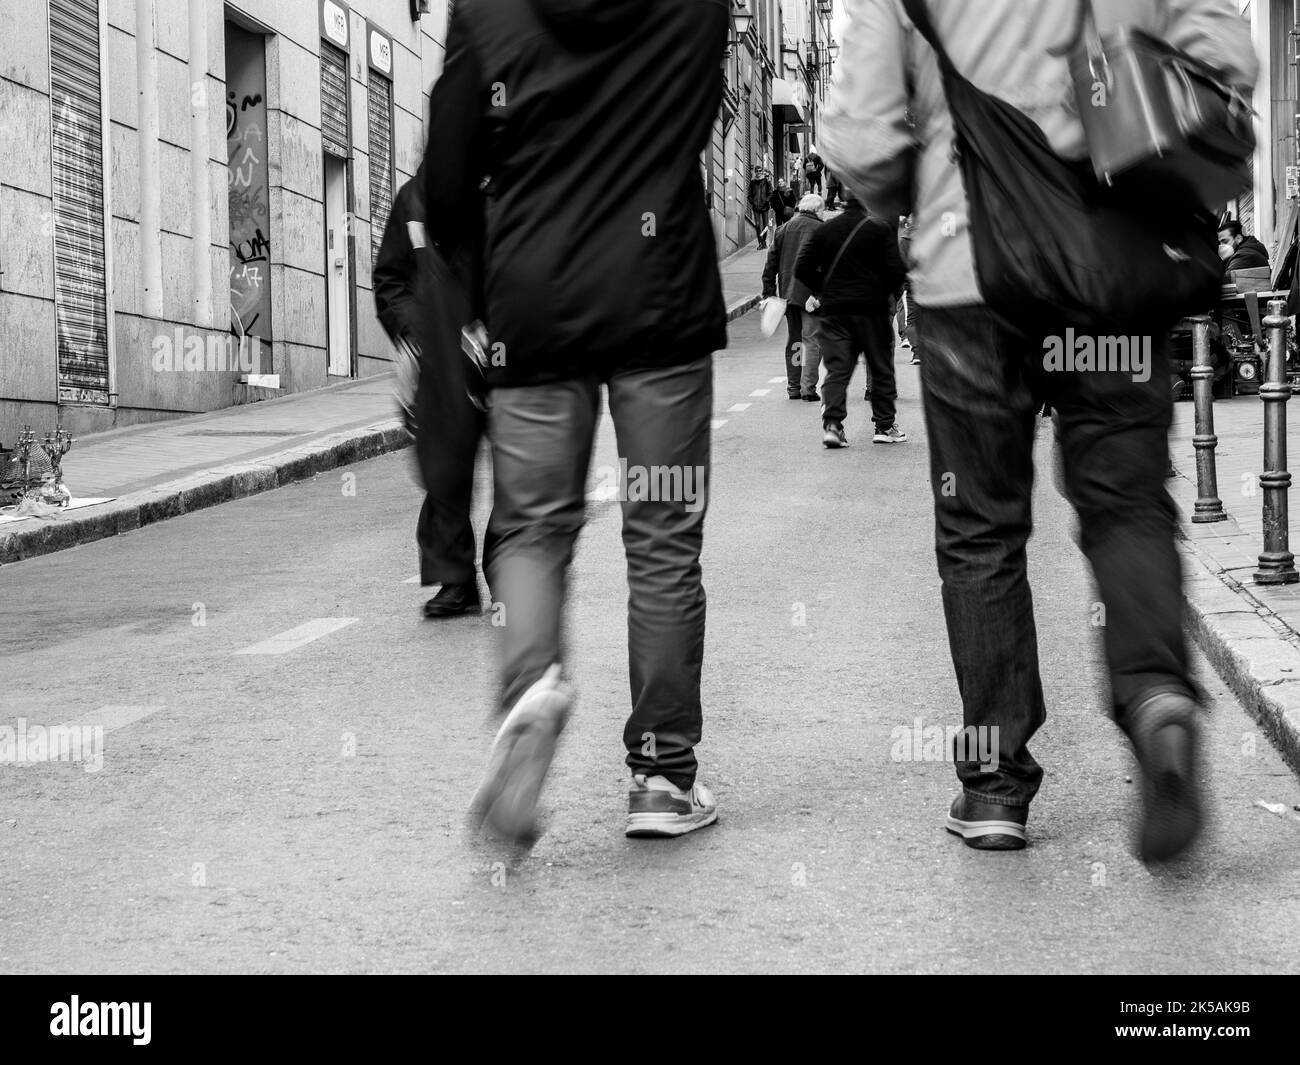 Black and white photography of people walking outdoors on the street. Stock Photo